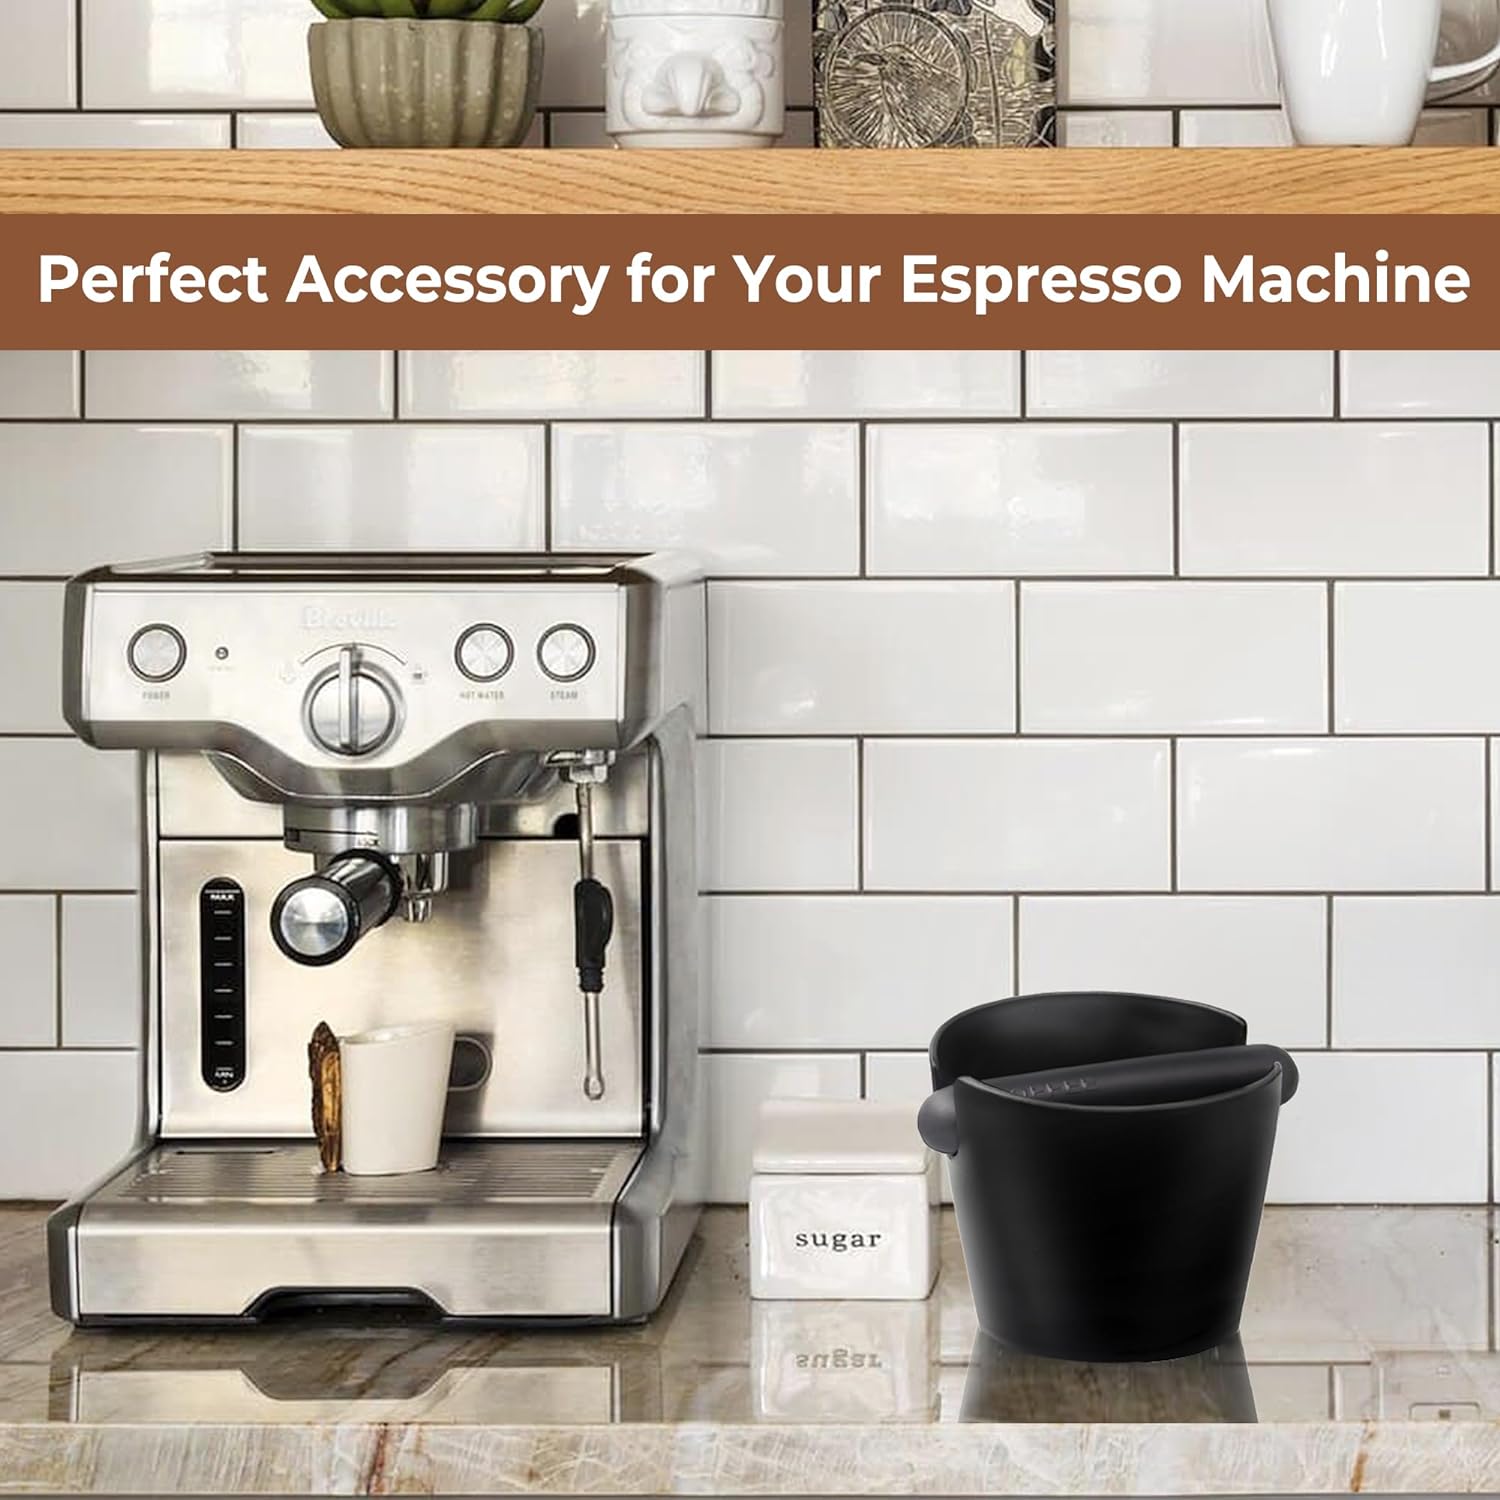 Knock Box Espresso Machine Accessories, 4.5 Inch Barista Style Coffee Knock Box for Grounds with Removable Shock-Absorbent Knock Bar and Anti-Slip Base, Durable Espresso Dump Bin for Home/Office